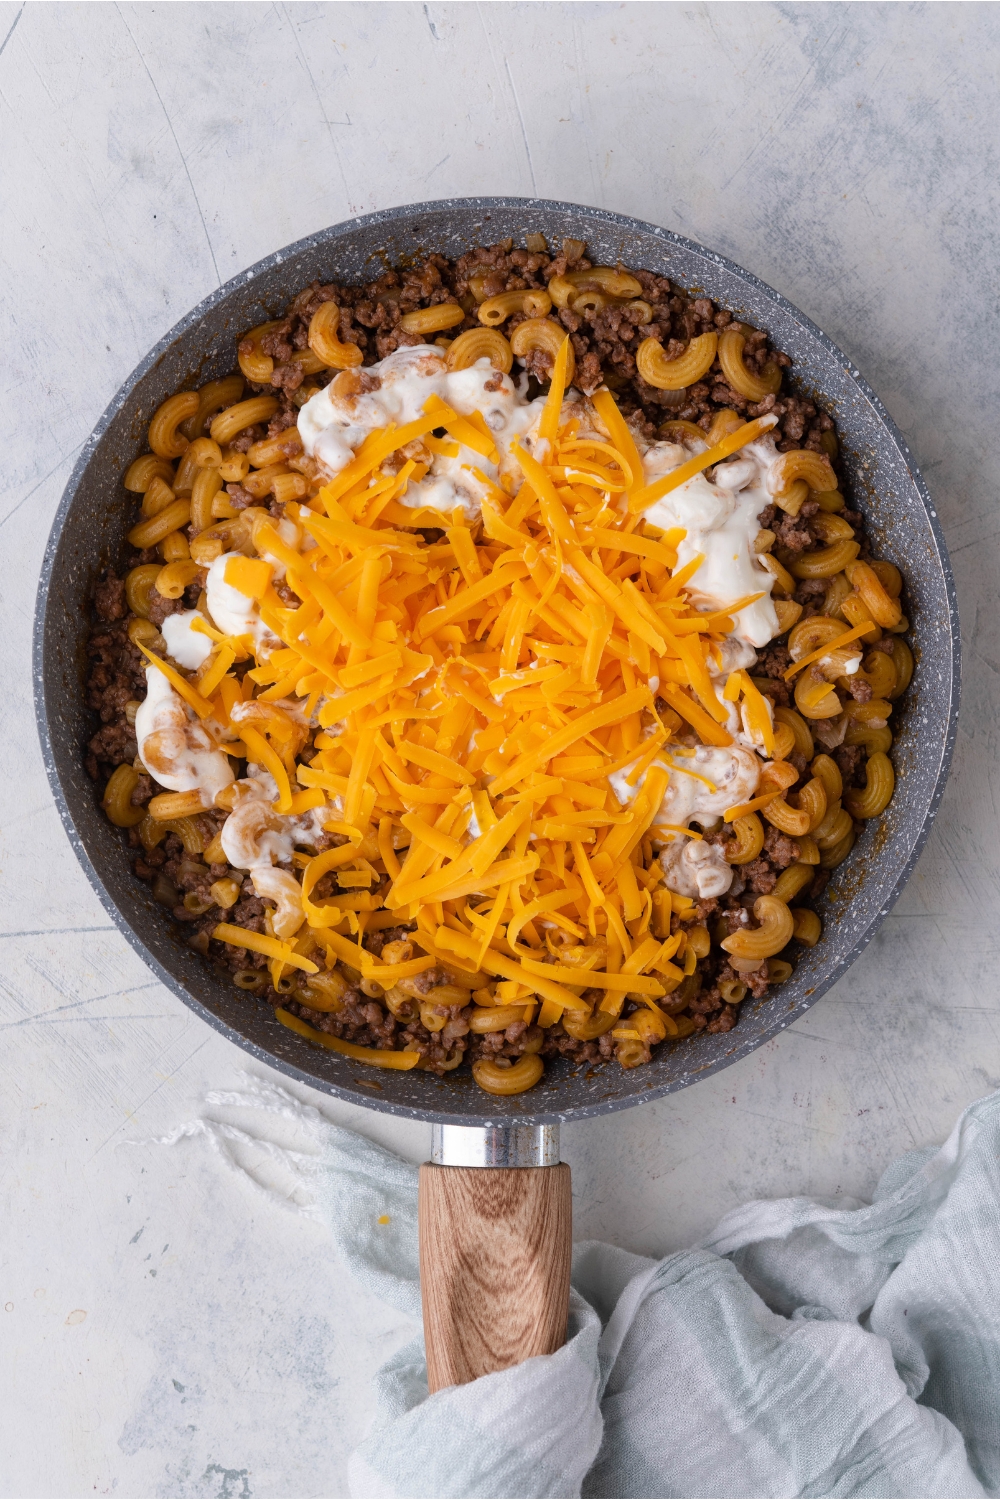 A skillet with elbow macaroni mixed in with ground beef. There is sour cream and shredded cheese topped directly in the center of the skillet and not yet mixed in. There is a dish towel wrapped around the handle of the skillet.